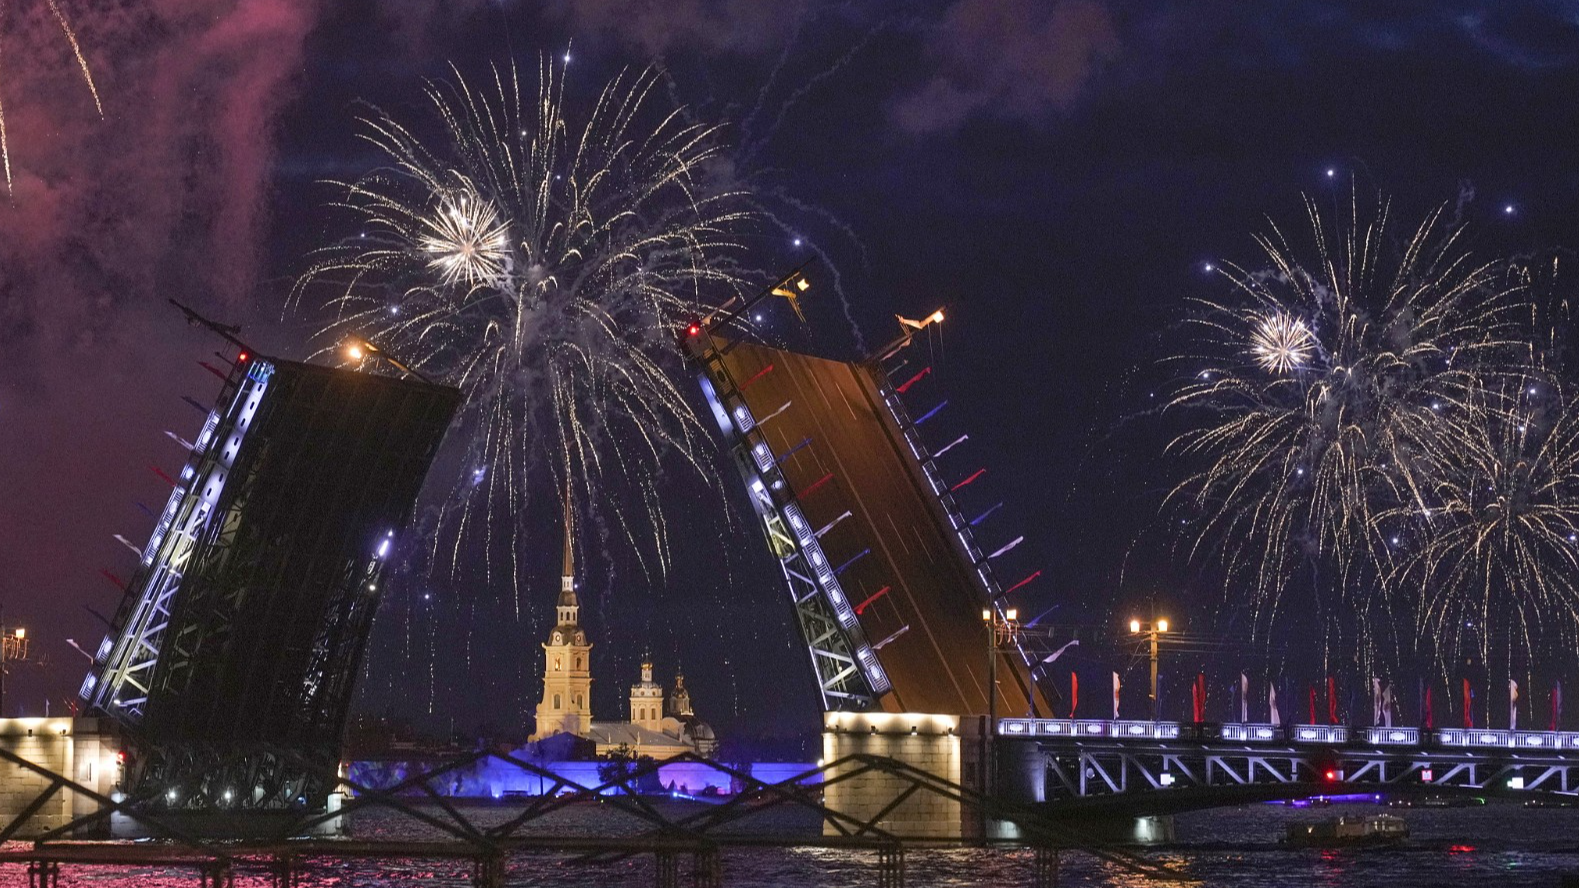 Fireworks go off over the Dvortsovy drawbridge during celebrations for the 319th anniversary of the Saint Petersburg city, Saint Petersburg, Russia, May 29, 2022. /CFP